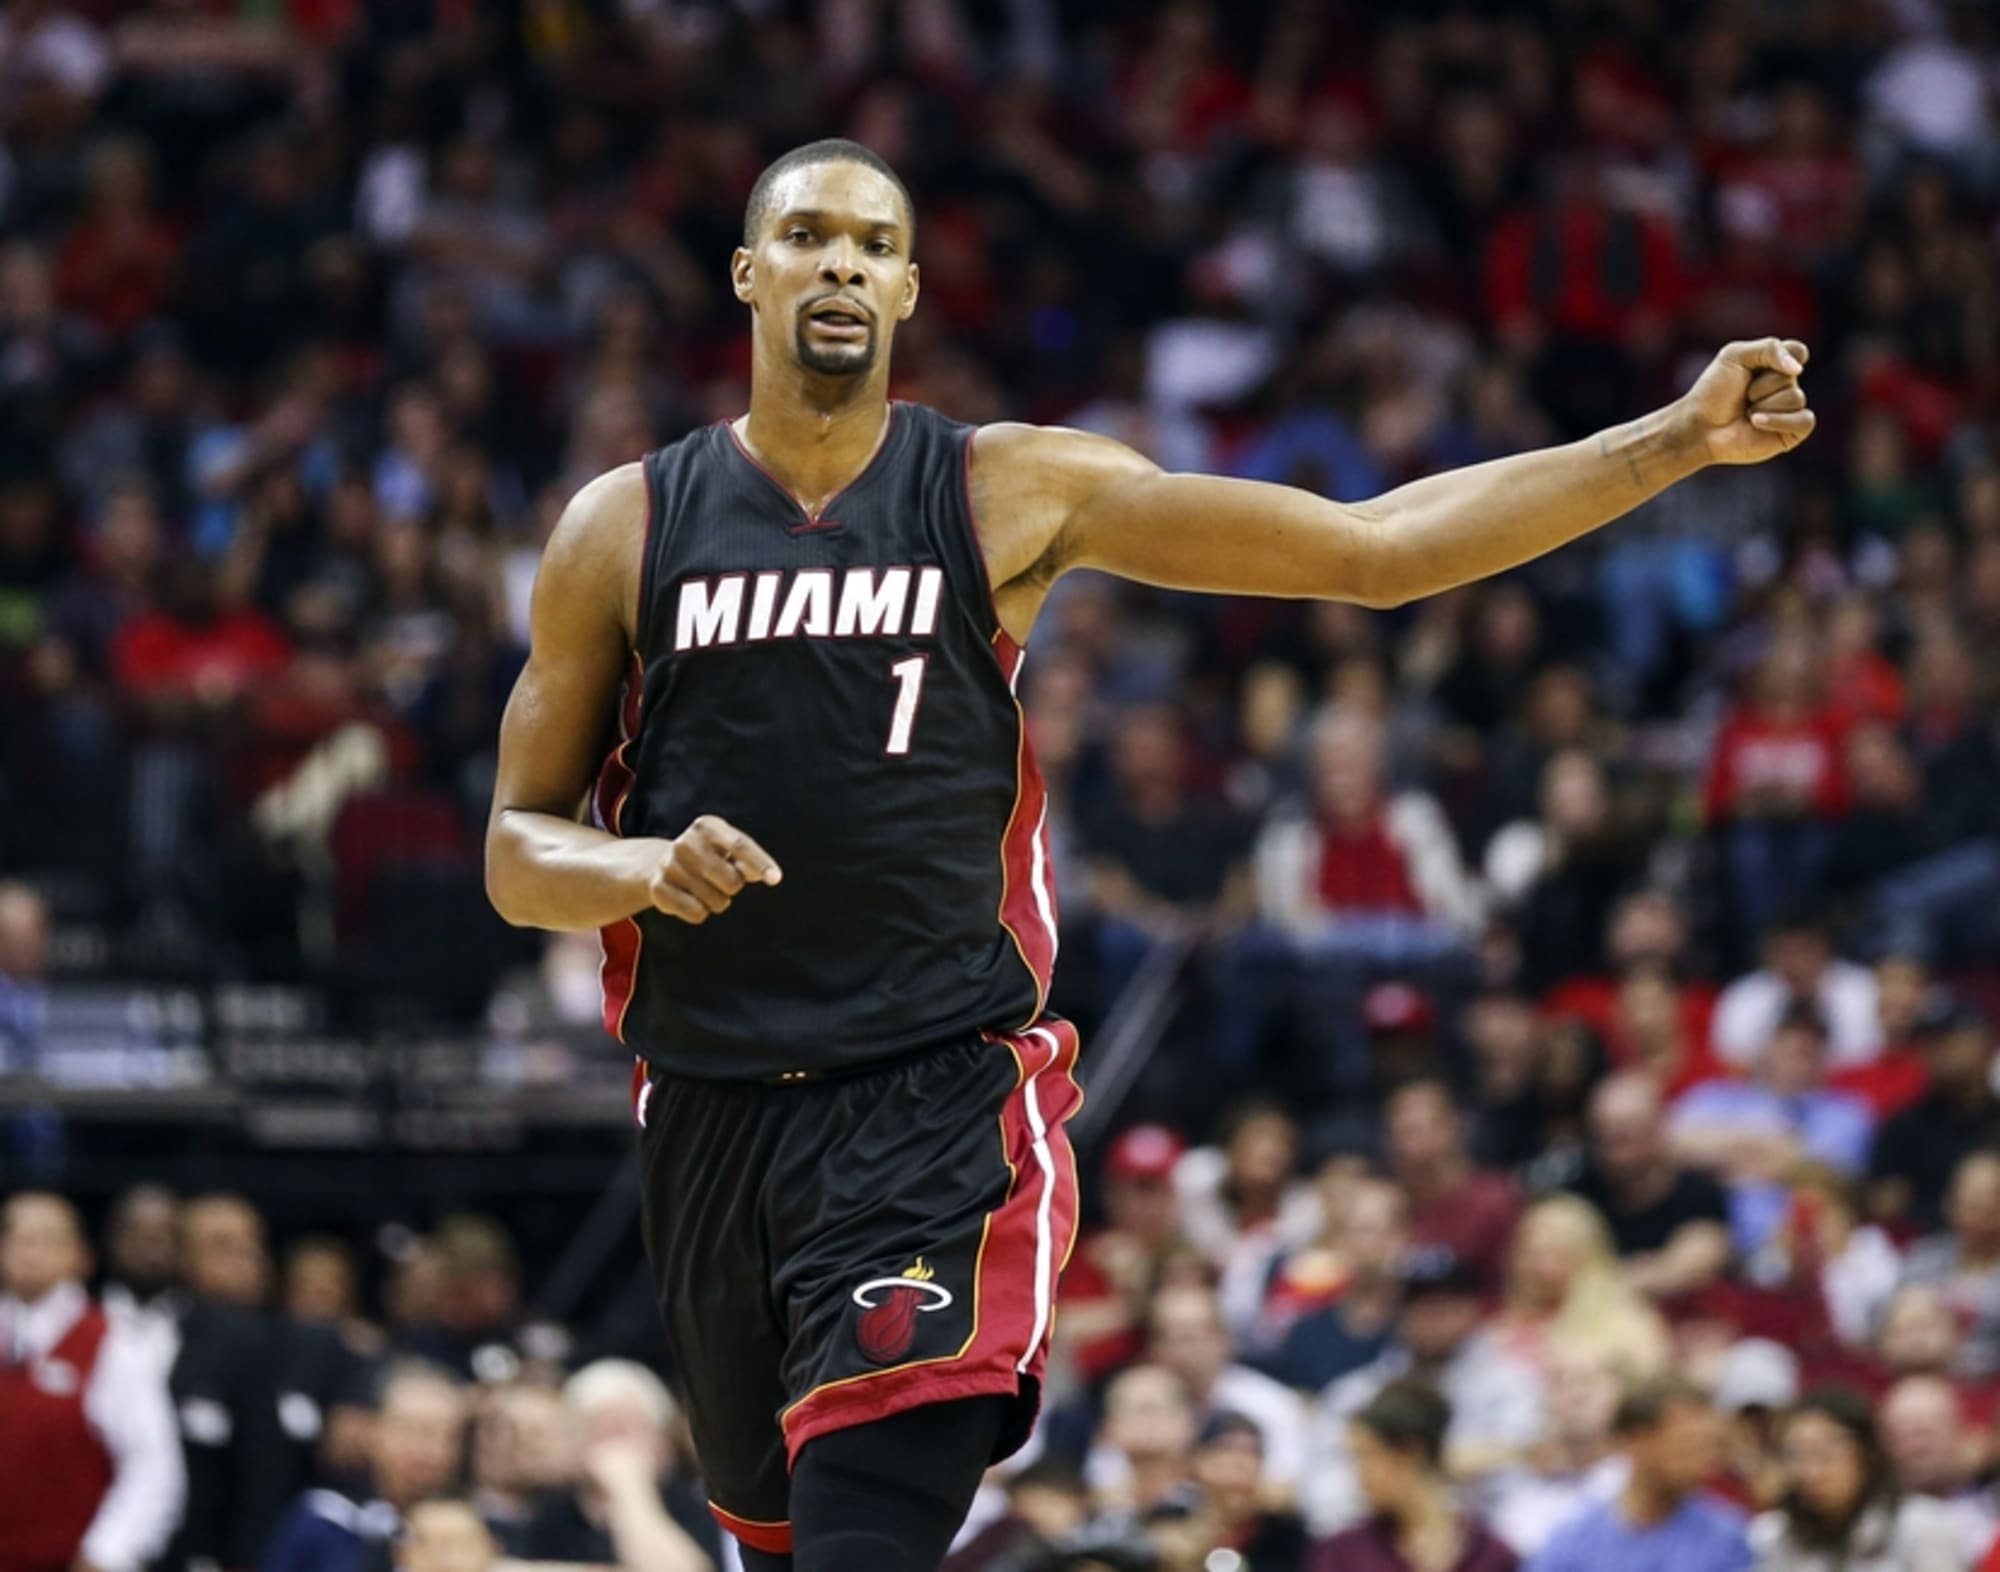 Toronto Raptors: Chris Bosh wants to make a comeback but at what cost?